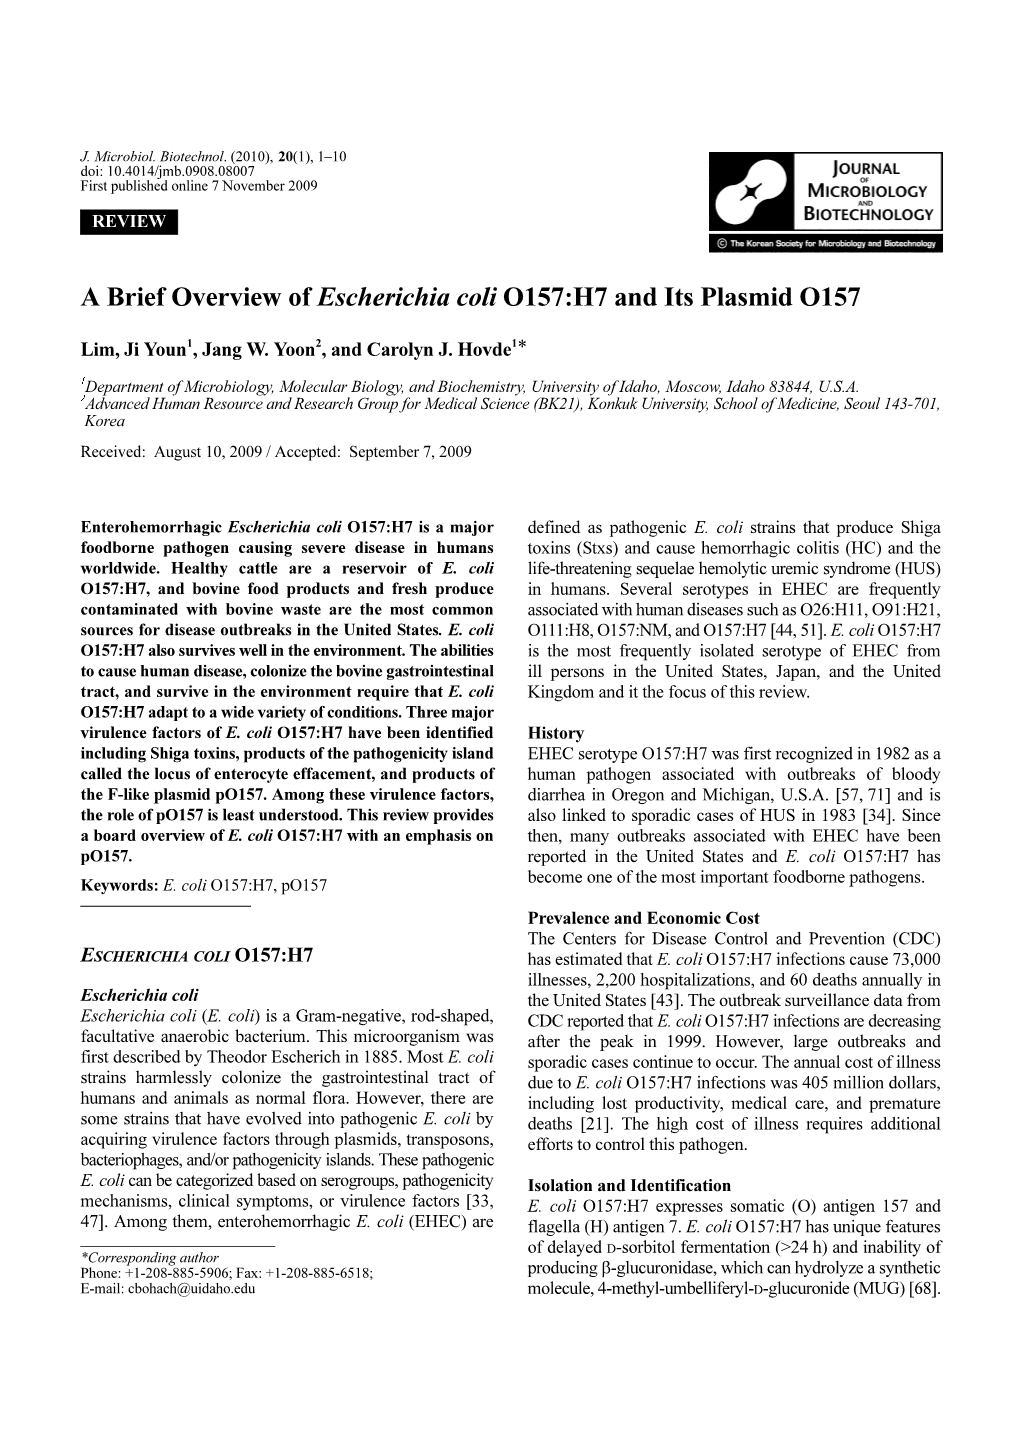 A Brief Overview of Escherichia Coli O157:H7 and Its Plasmid O157